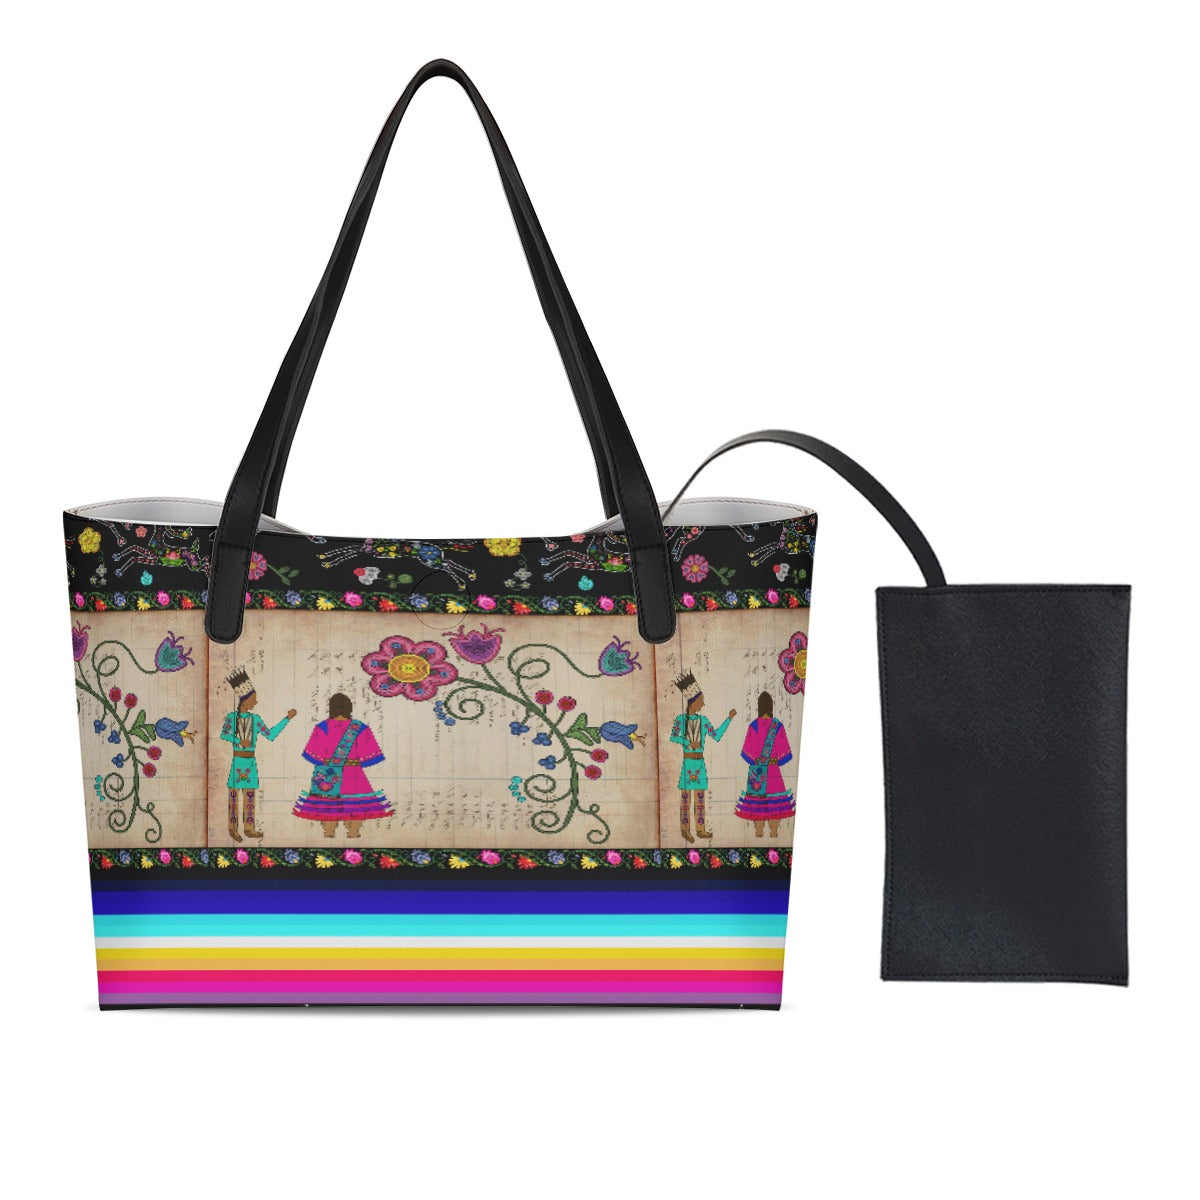 Floral Ledger Sweethearts Shopping Tote Bag With Black Mini Purse